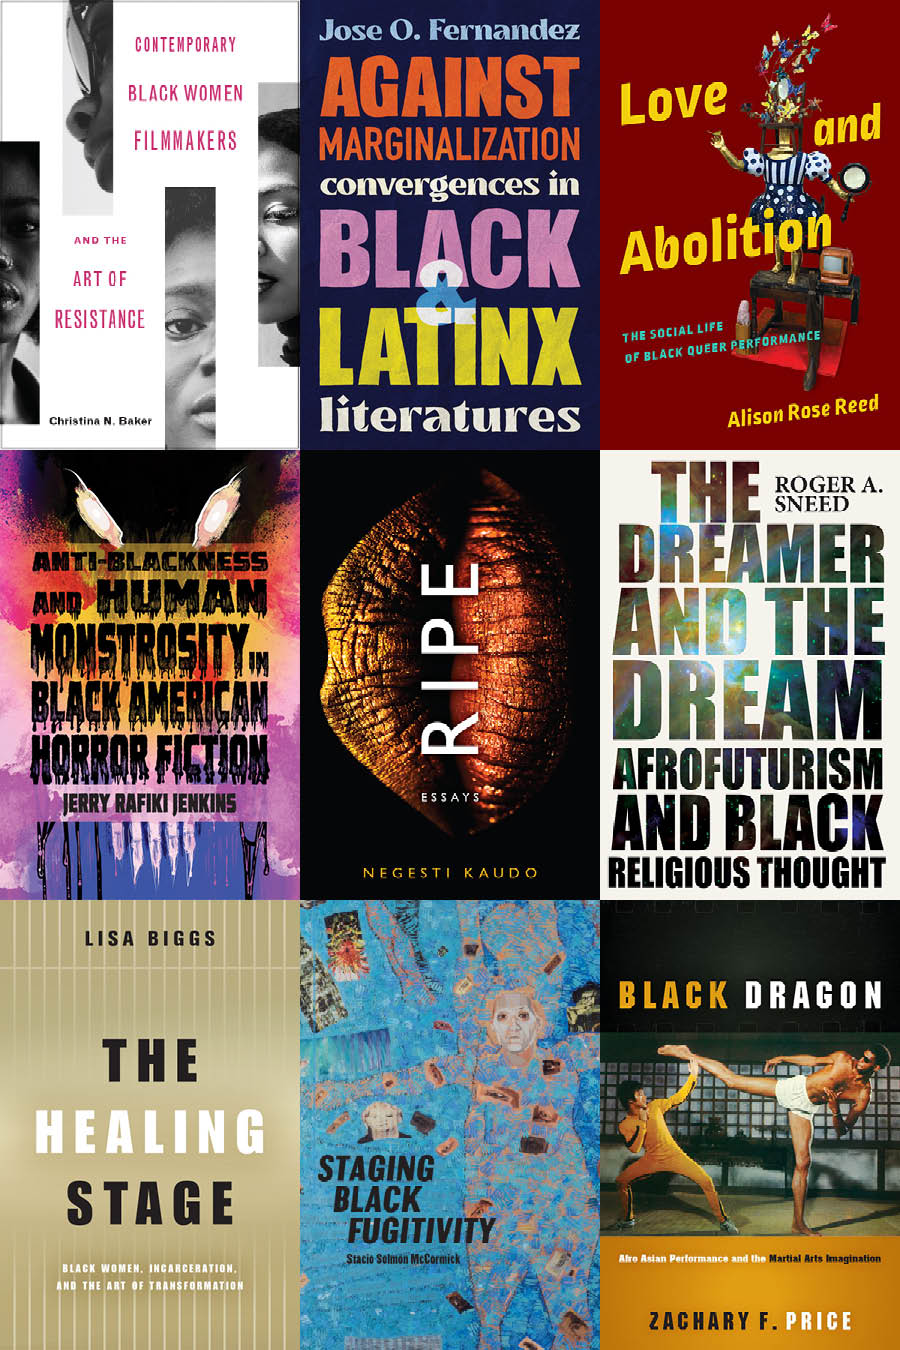 A collage of OSU Press Black studies books arranged in a 3x3 grid, showing the range of the press's output